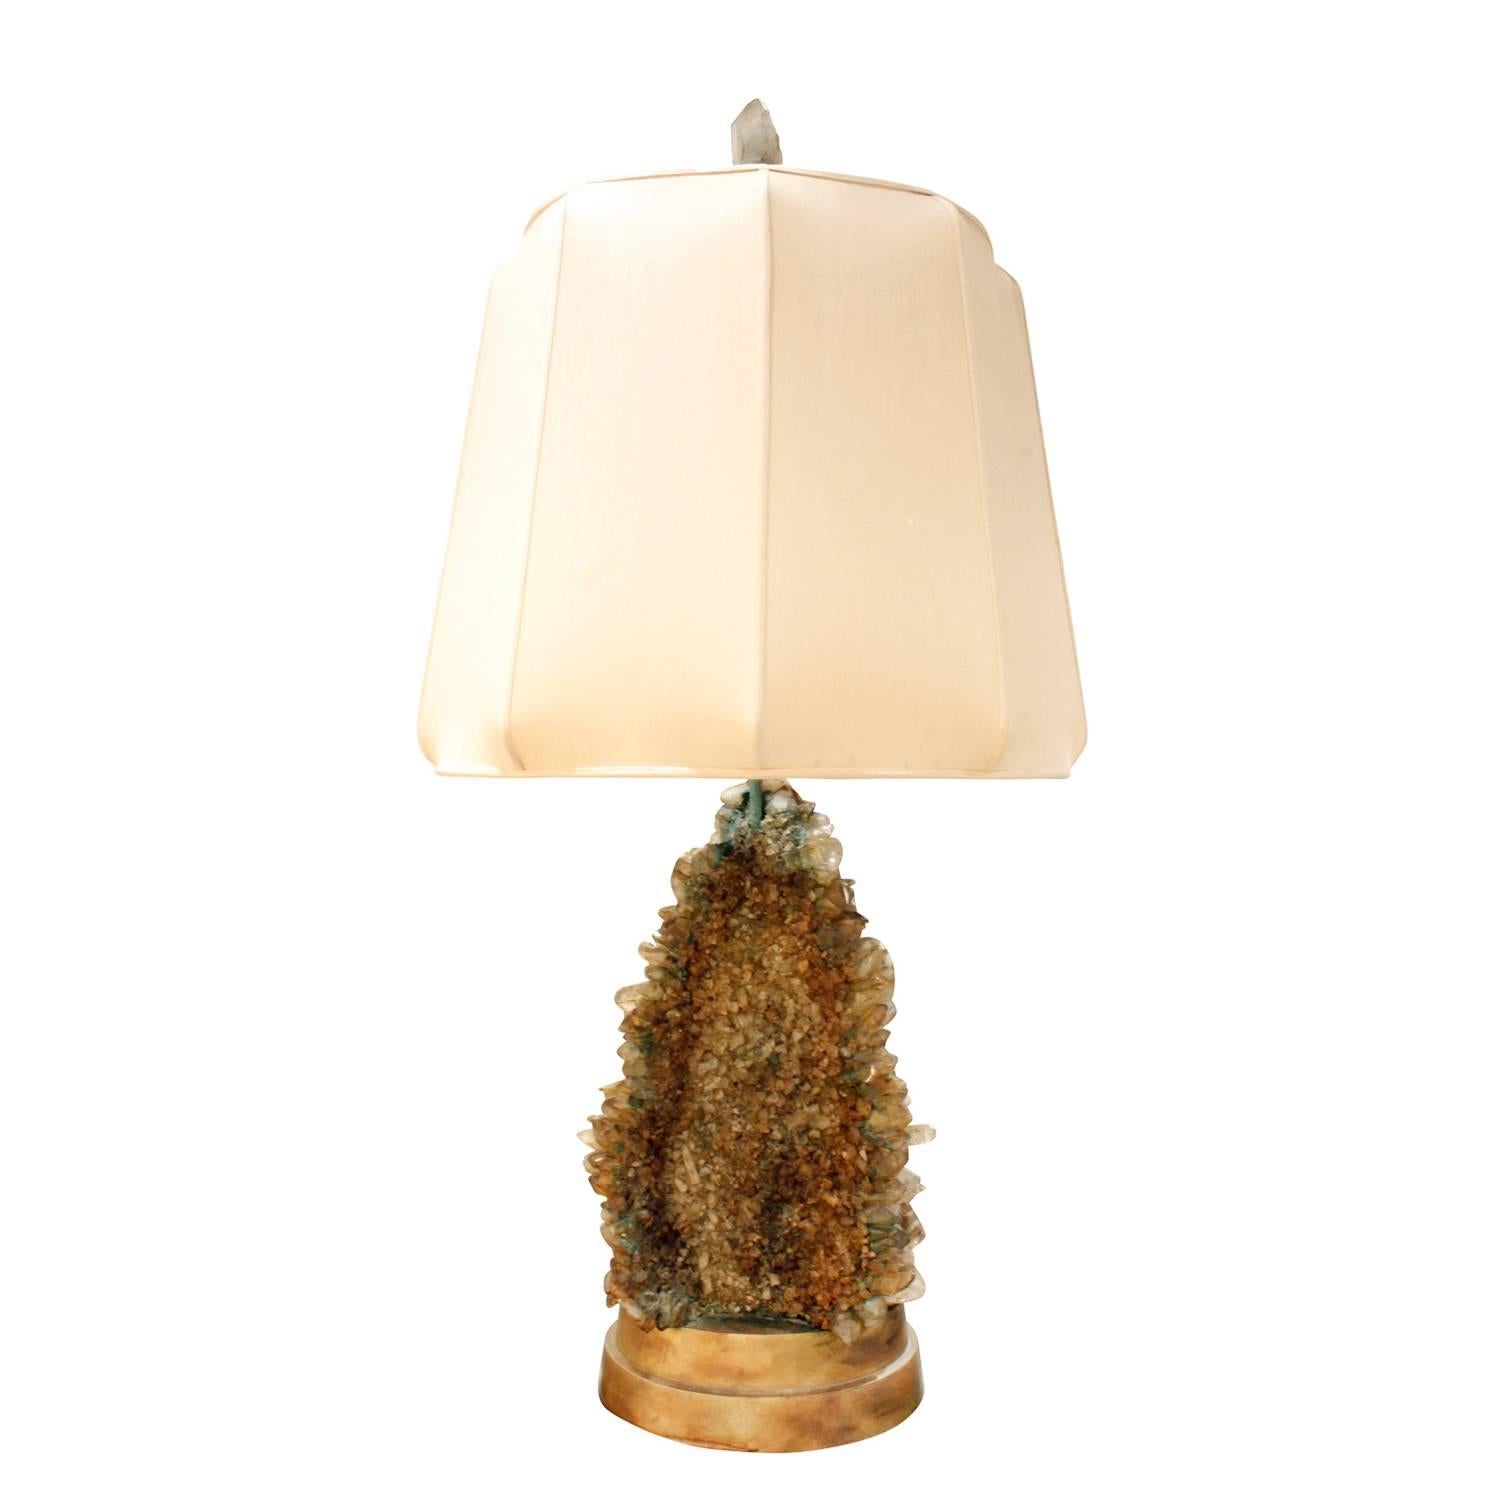 Hand-Crafted Carole Stupell Extraordinary Quartz Crystal Table Lamp, 1950s